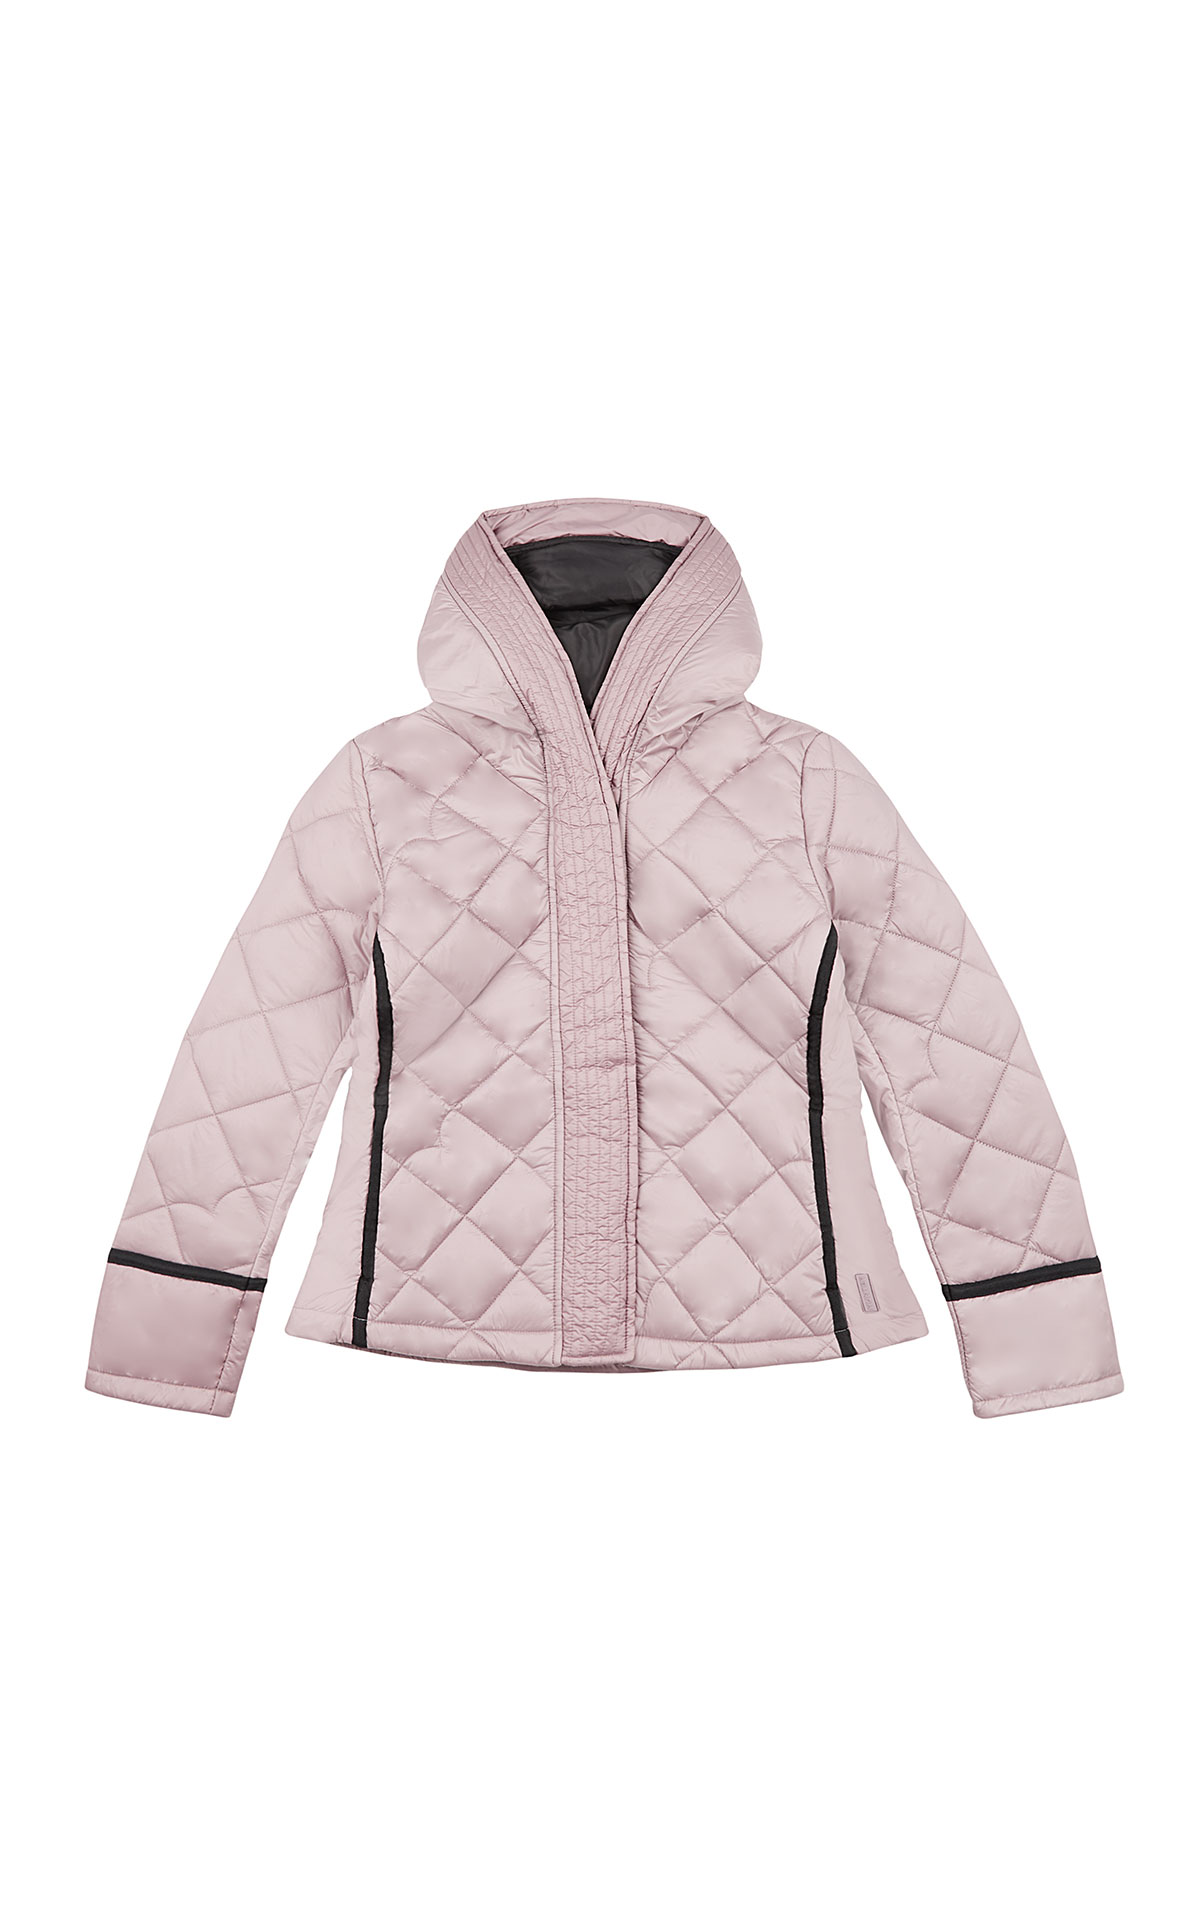 Hunter Womens refined quilted jacket from Bicester Village